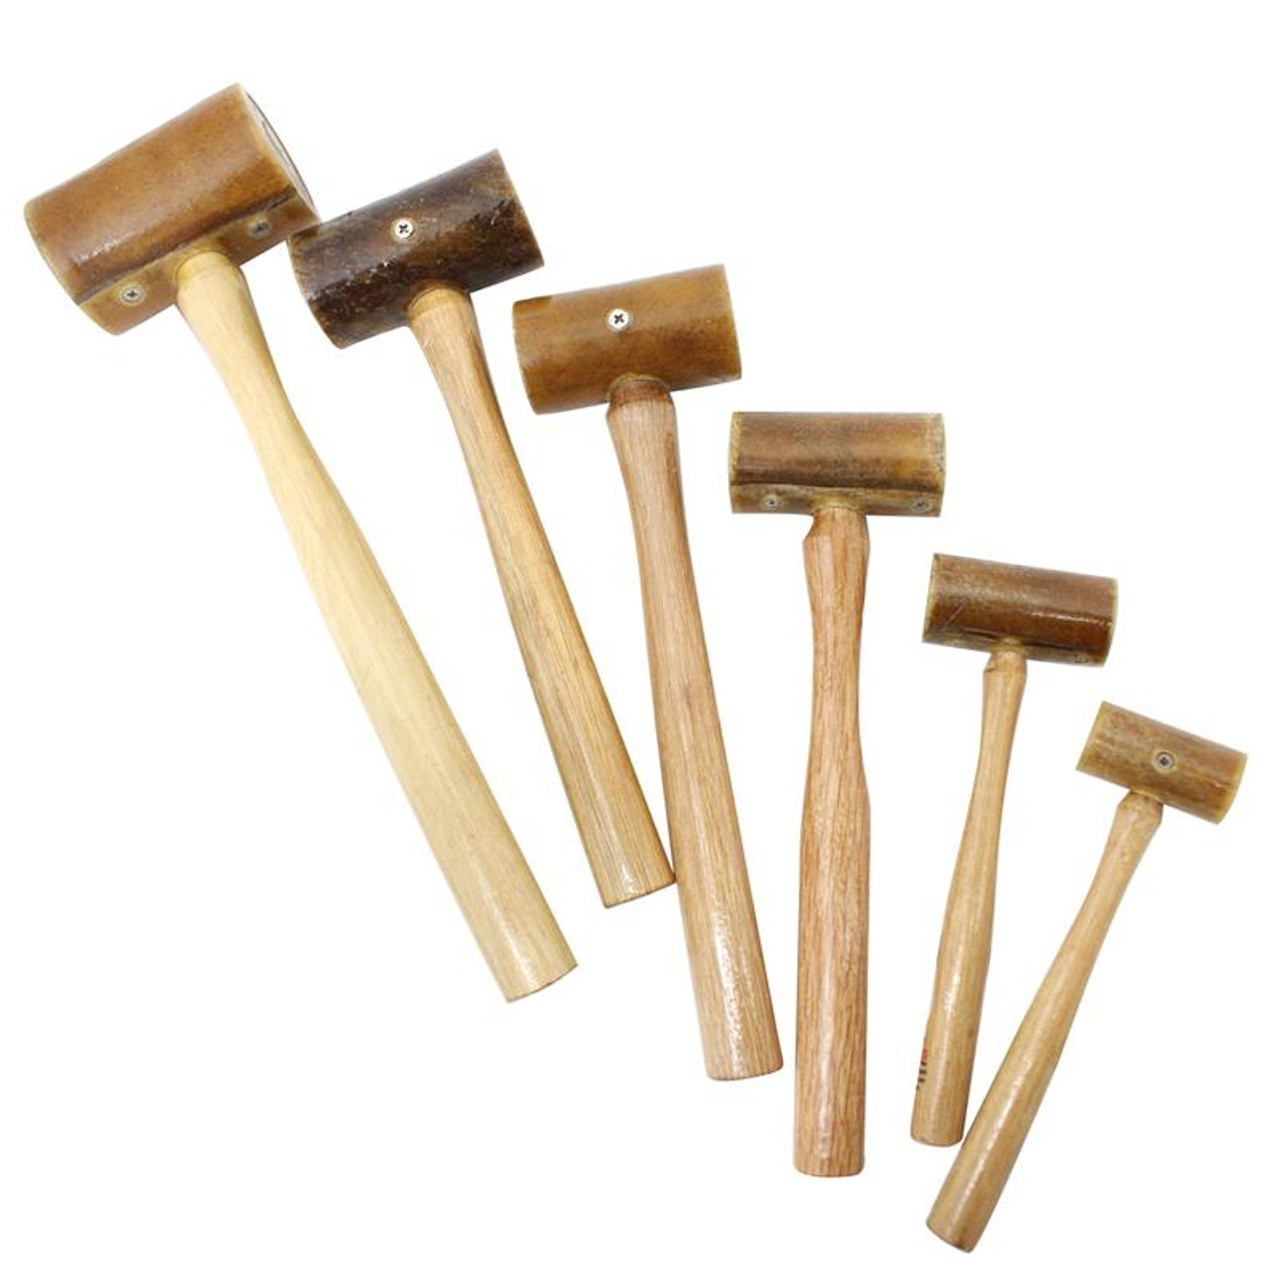 Large Rawhide Mallet - My Pick for Shaping, Forming and Flattening